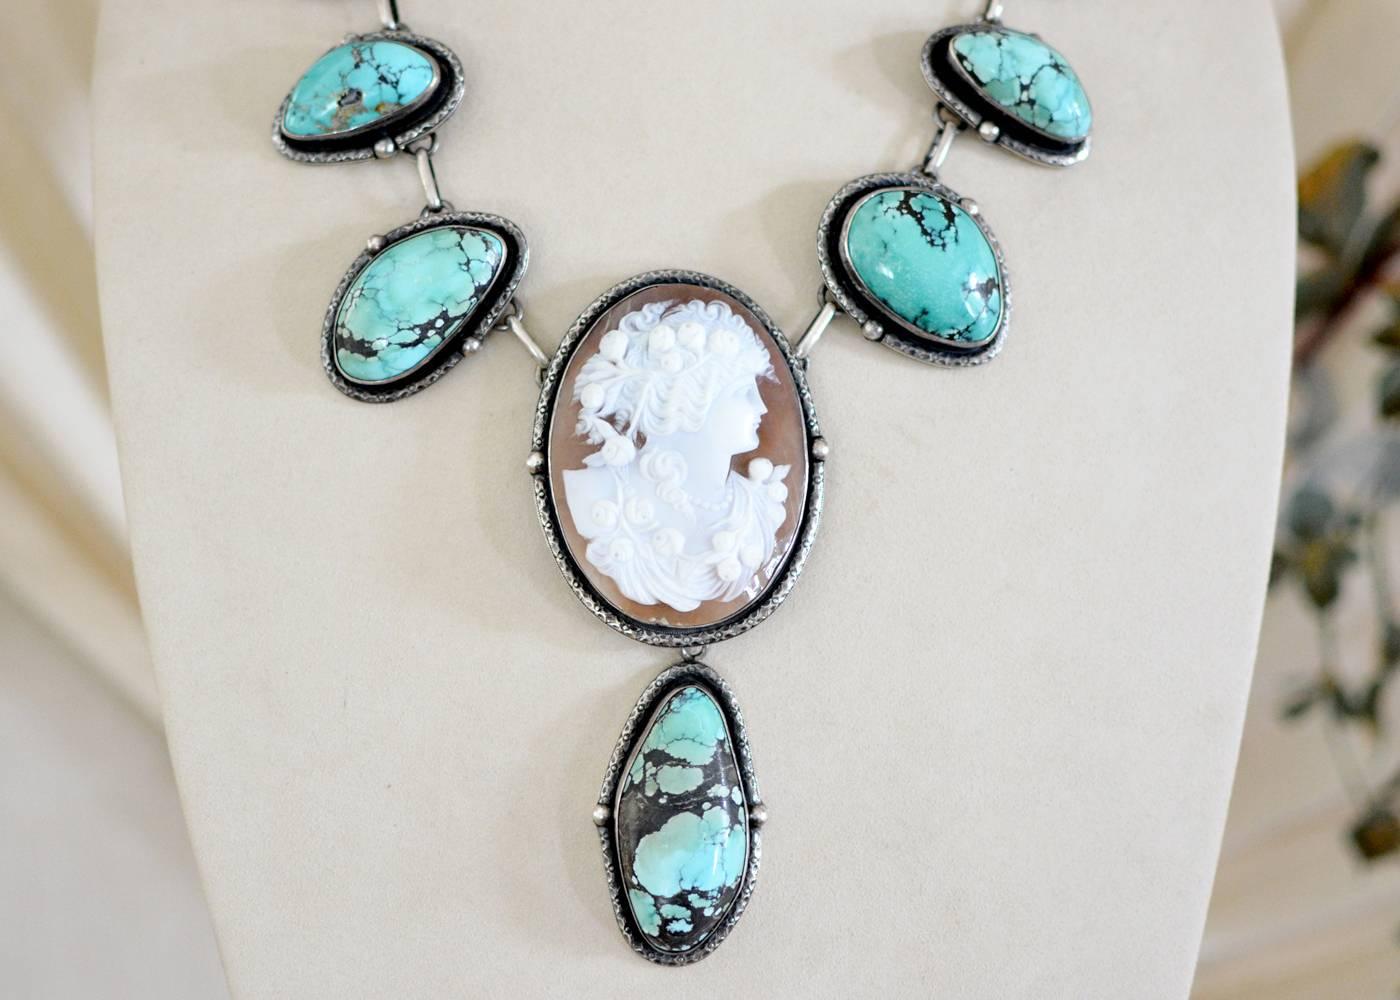 Artist Jill Garber Fine Antique Goddess Cameo with Natural Turquoise Festoon Necklace